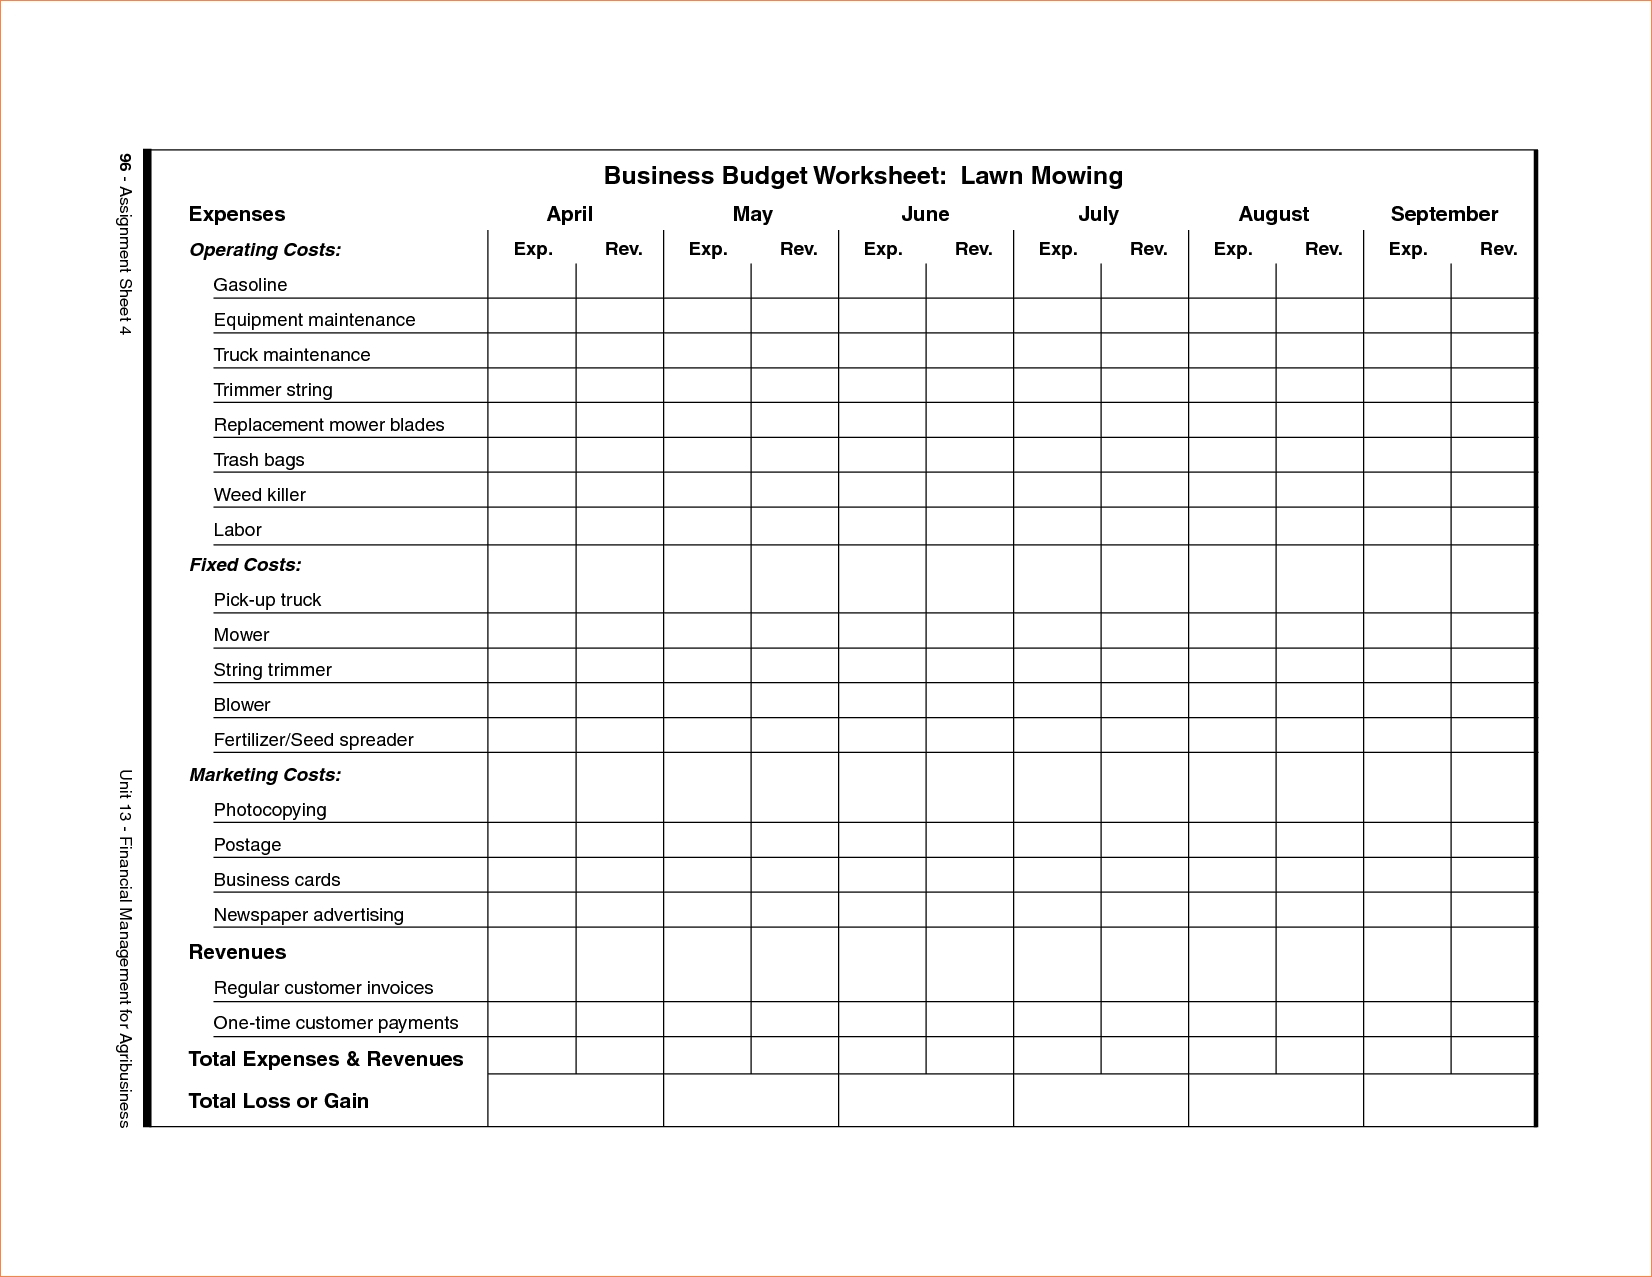 Lawn Care Schedule Spreadsheet And Lawn Care Business Expenses With Lawn Care Business Expenses Spreadsheet